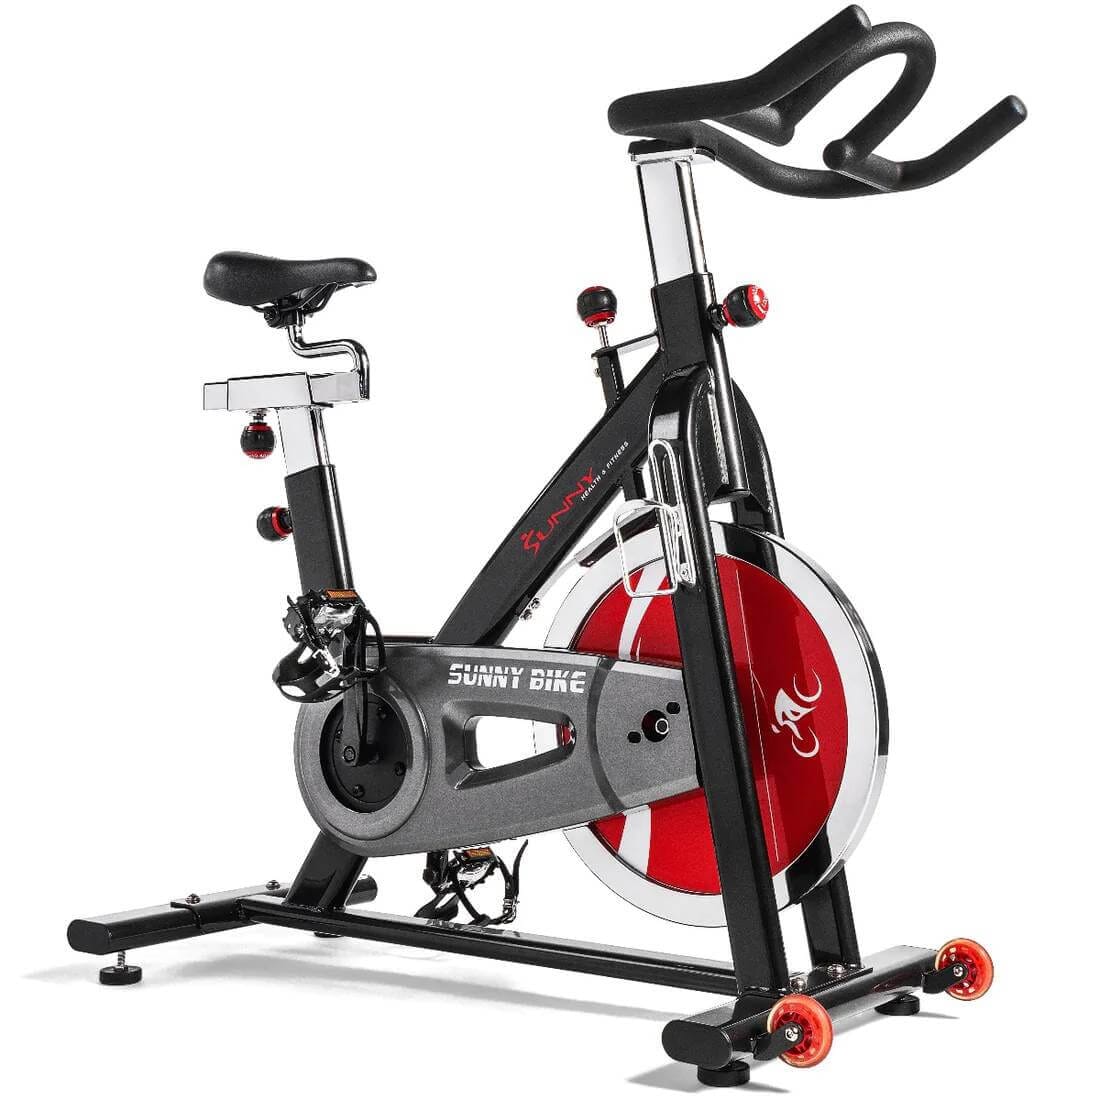 Sunny Health & Fitness Indoor Spin Bike-Smooth Flywheel-Adjustable Cycle-Secure Foot Pedals